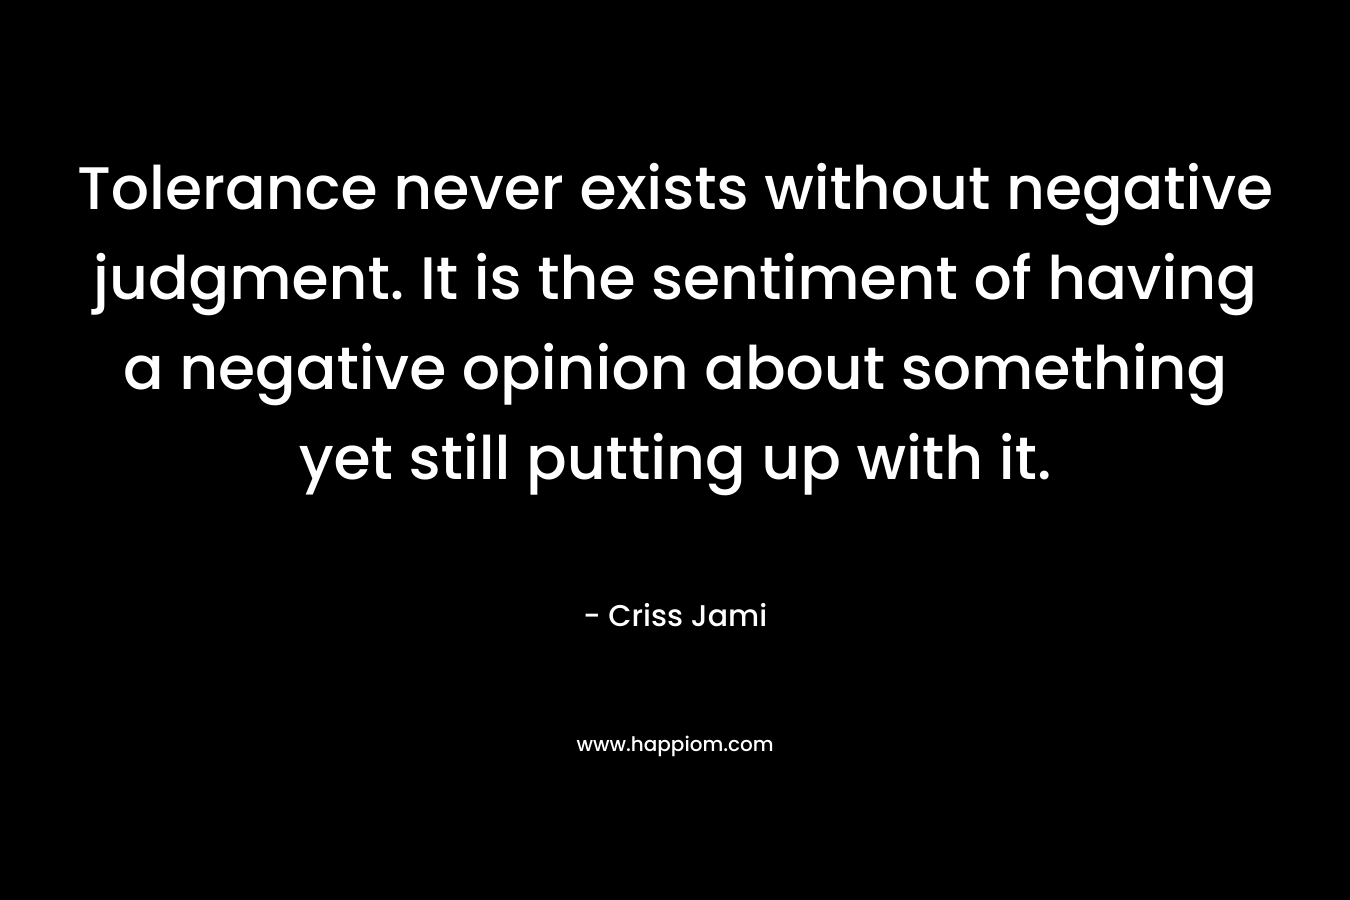 Tolerance never exists without negative judgment. It is the sentiment of having a negative opinion about something yet still putting up with it. – Criss Jami